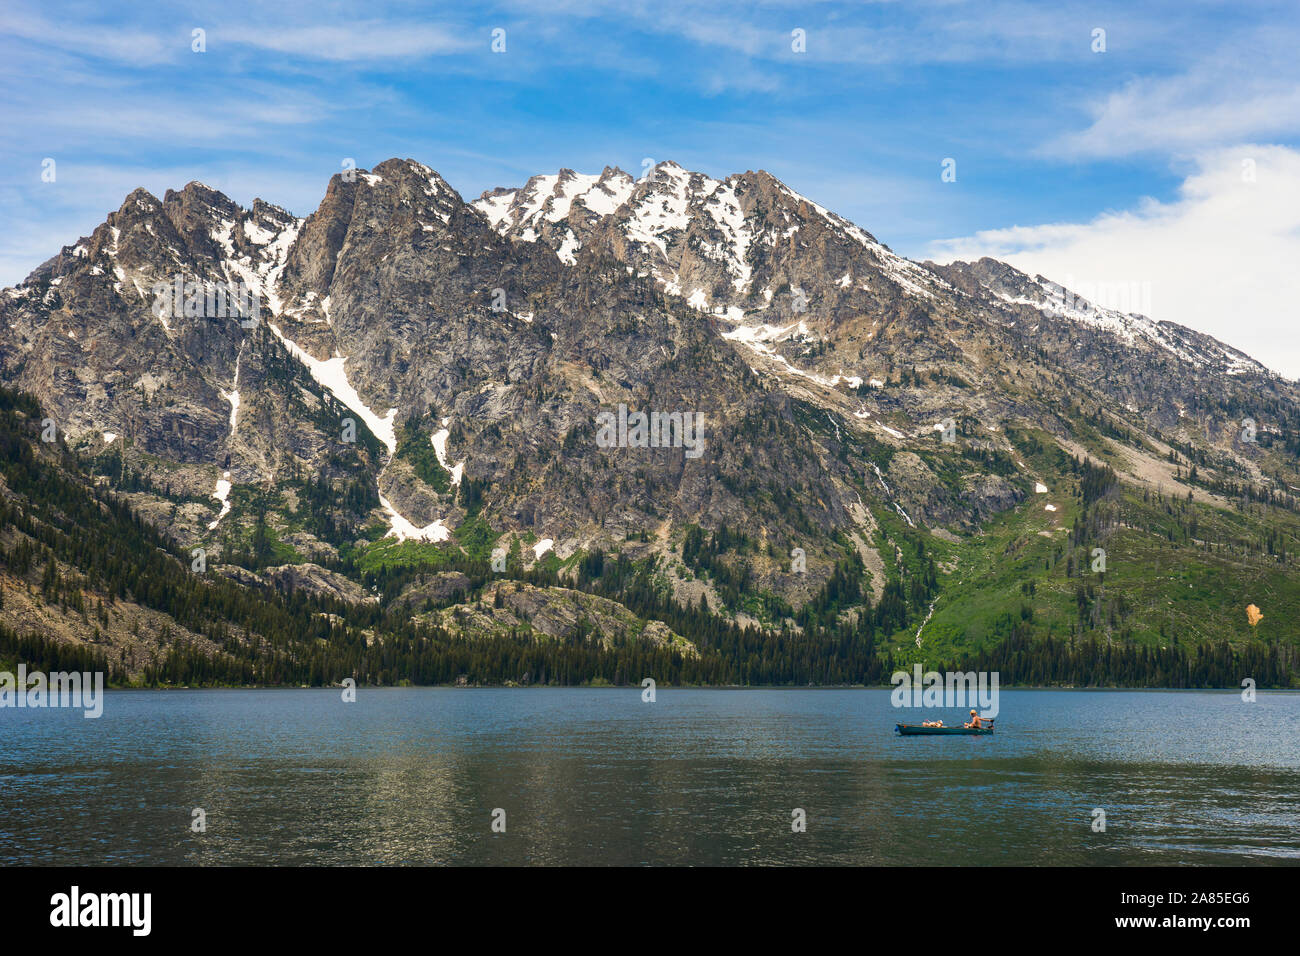 Person in a canoe fishing in Jenny Lake, mountains behind Stock Photo